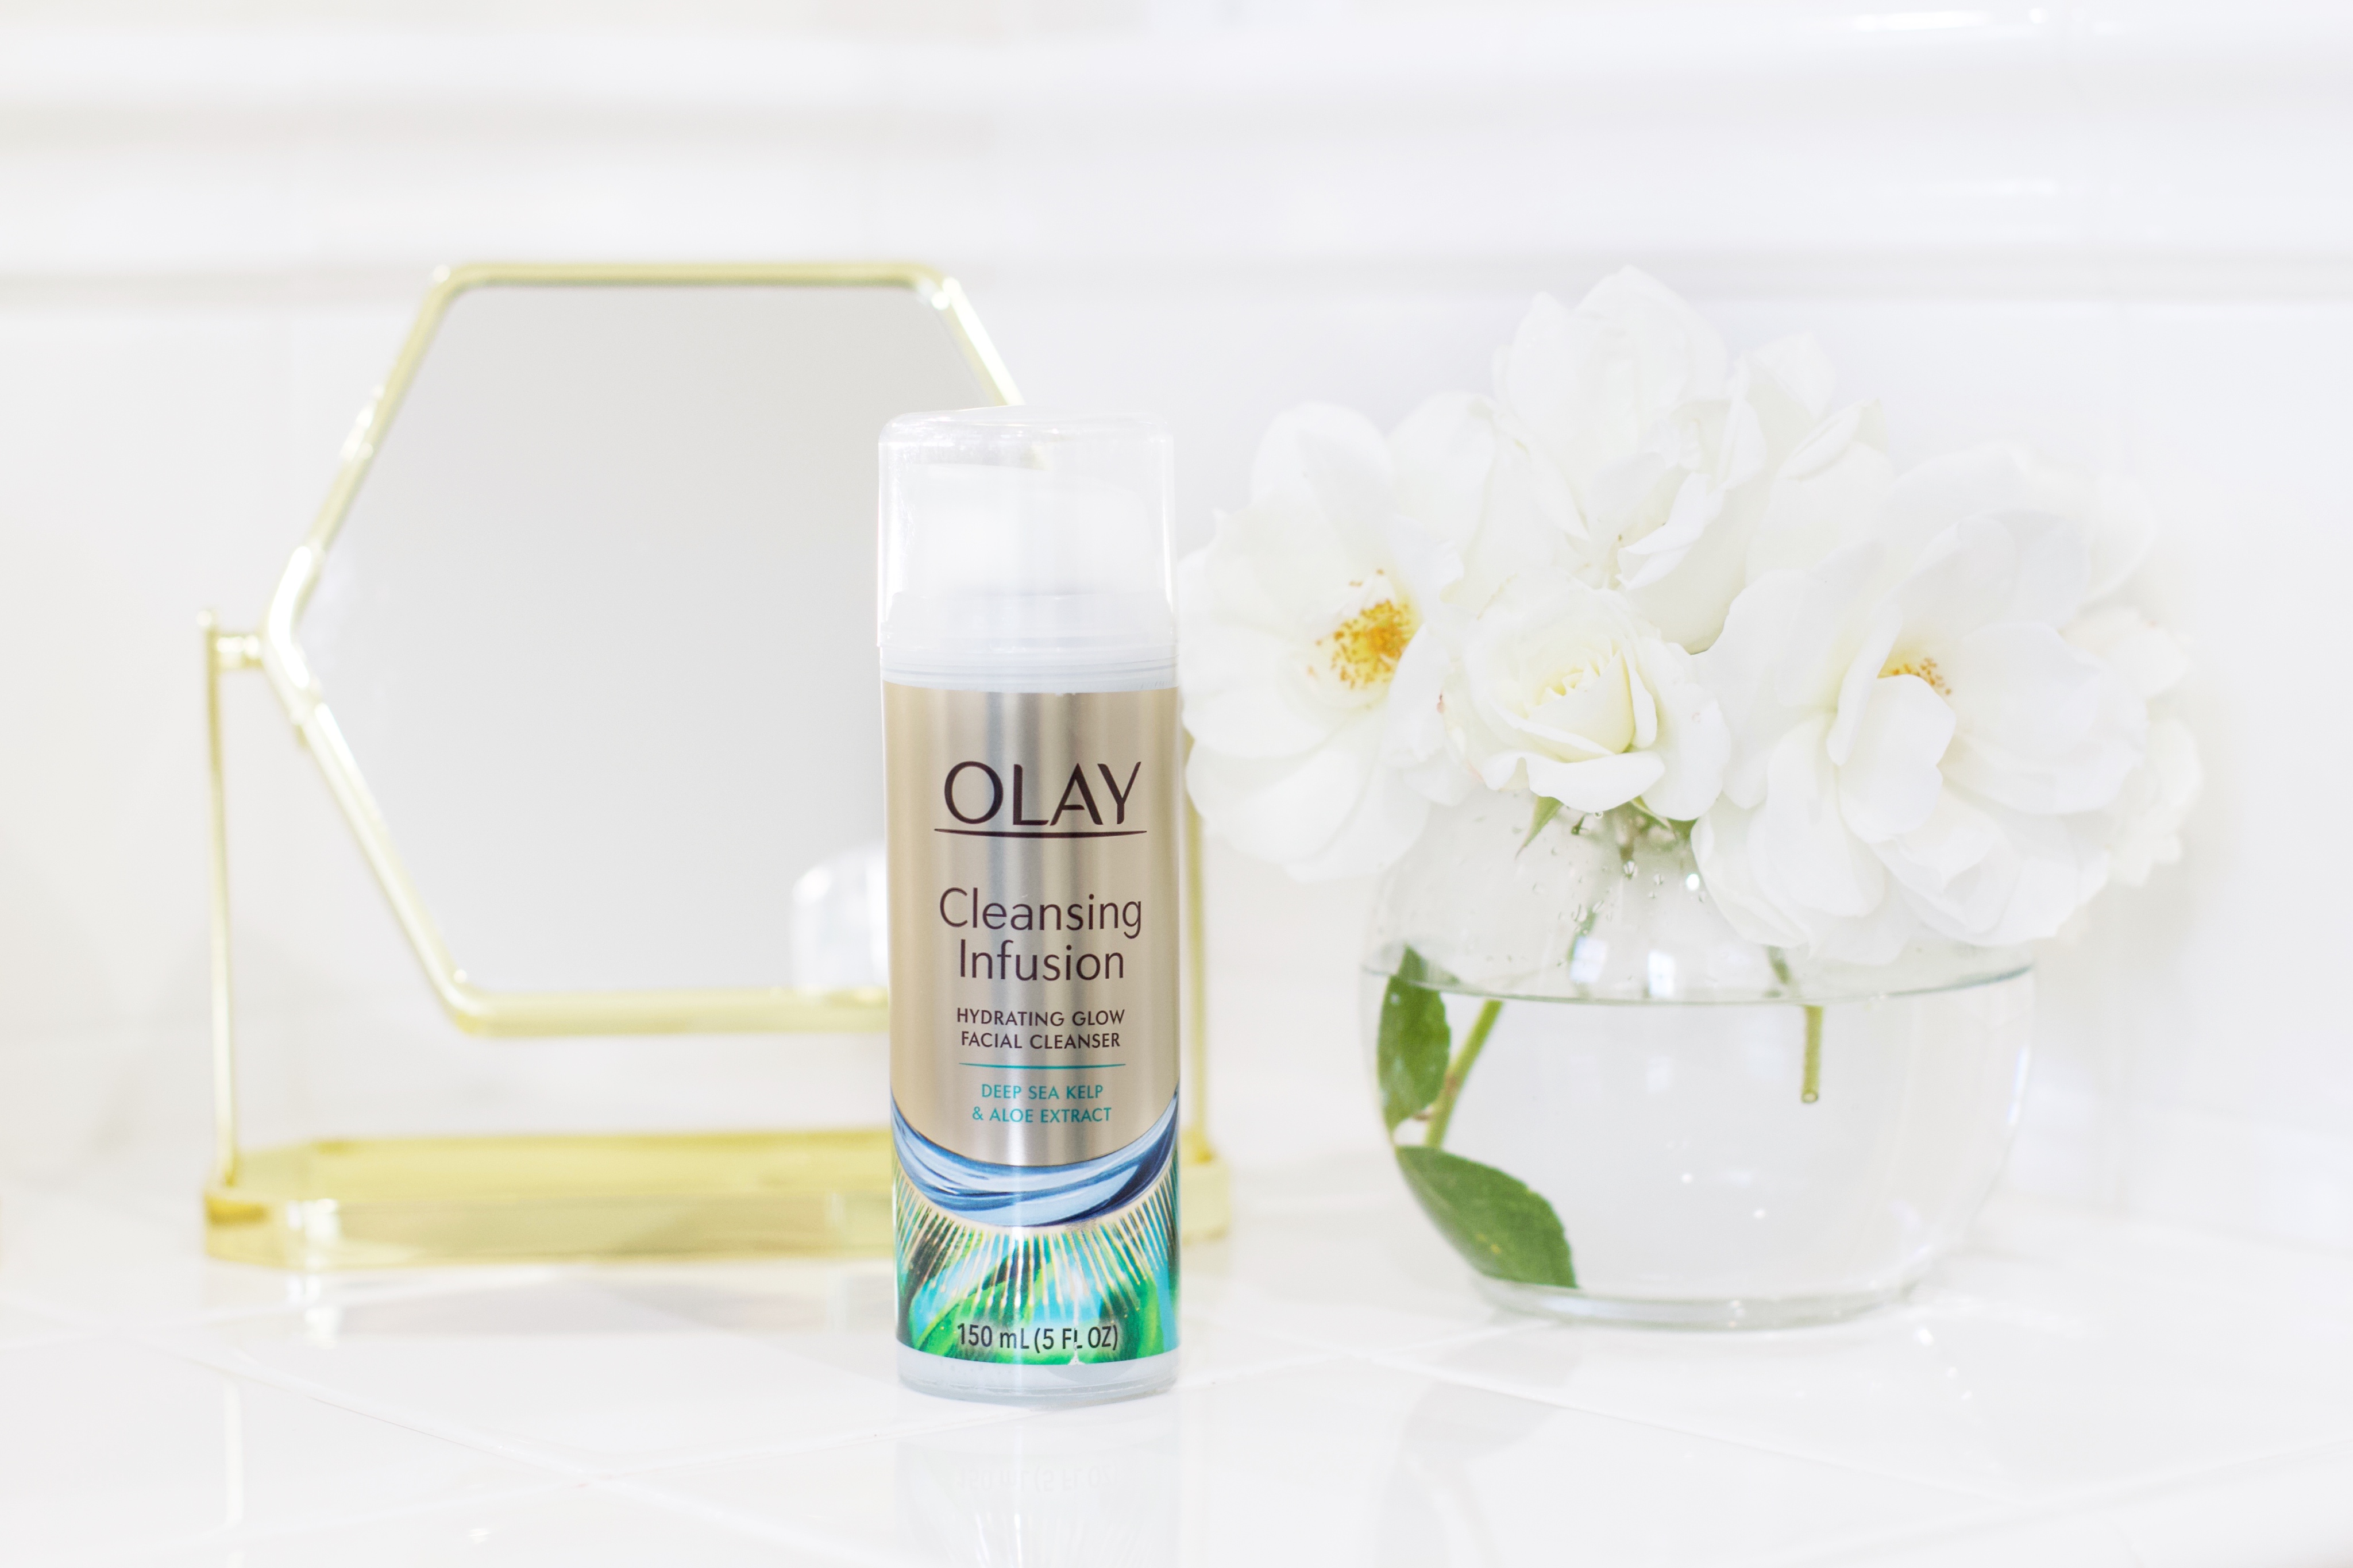 olay cleansing infusion facial cleanser